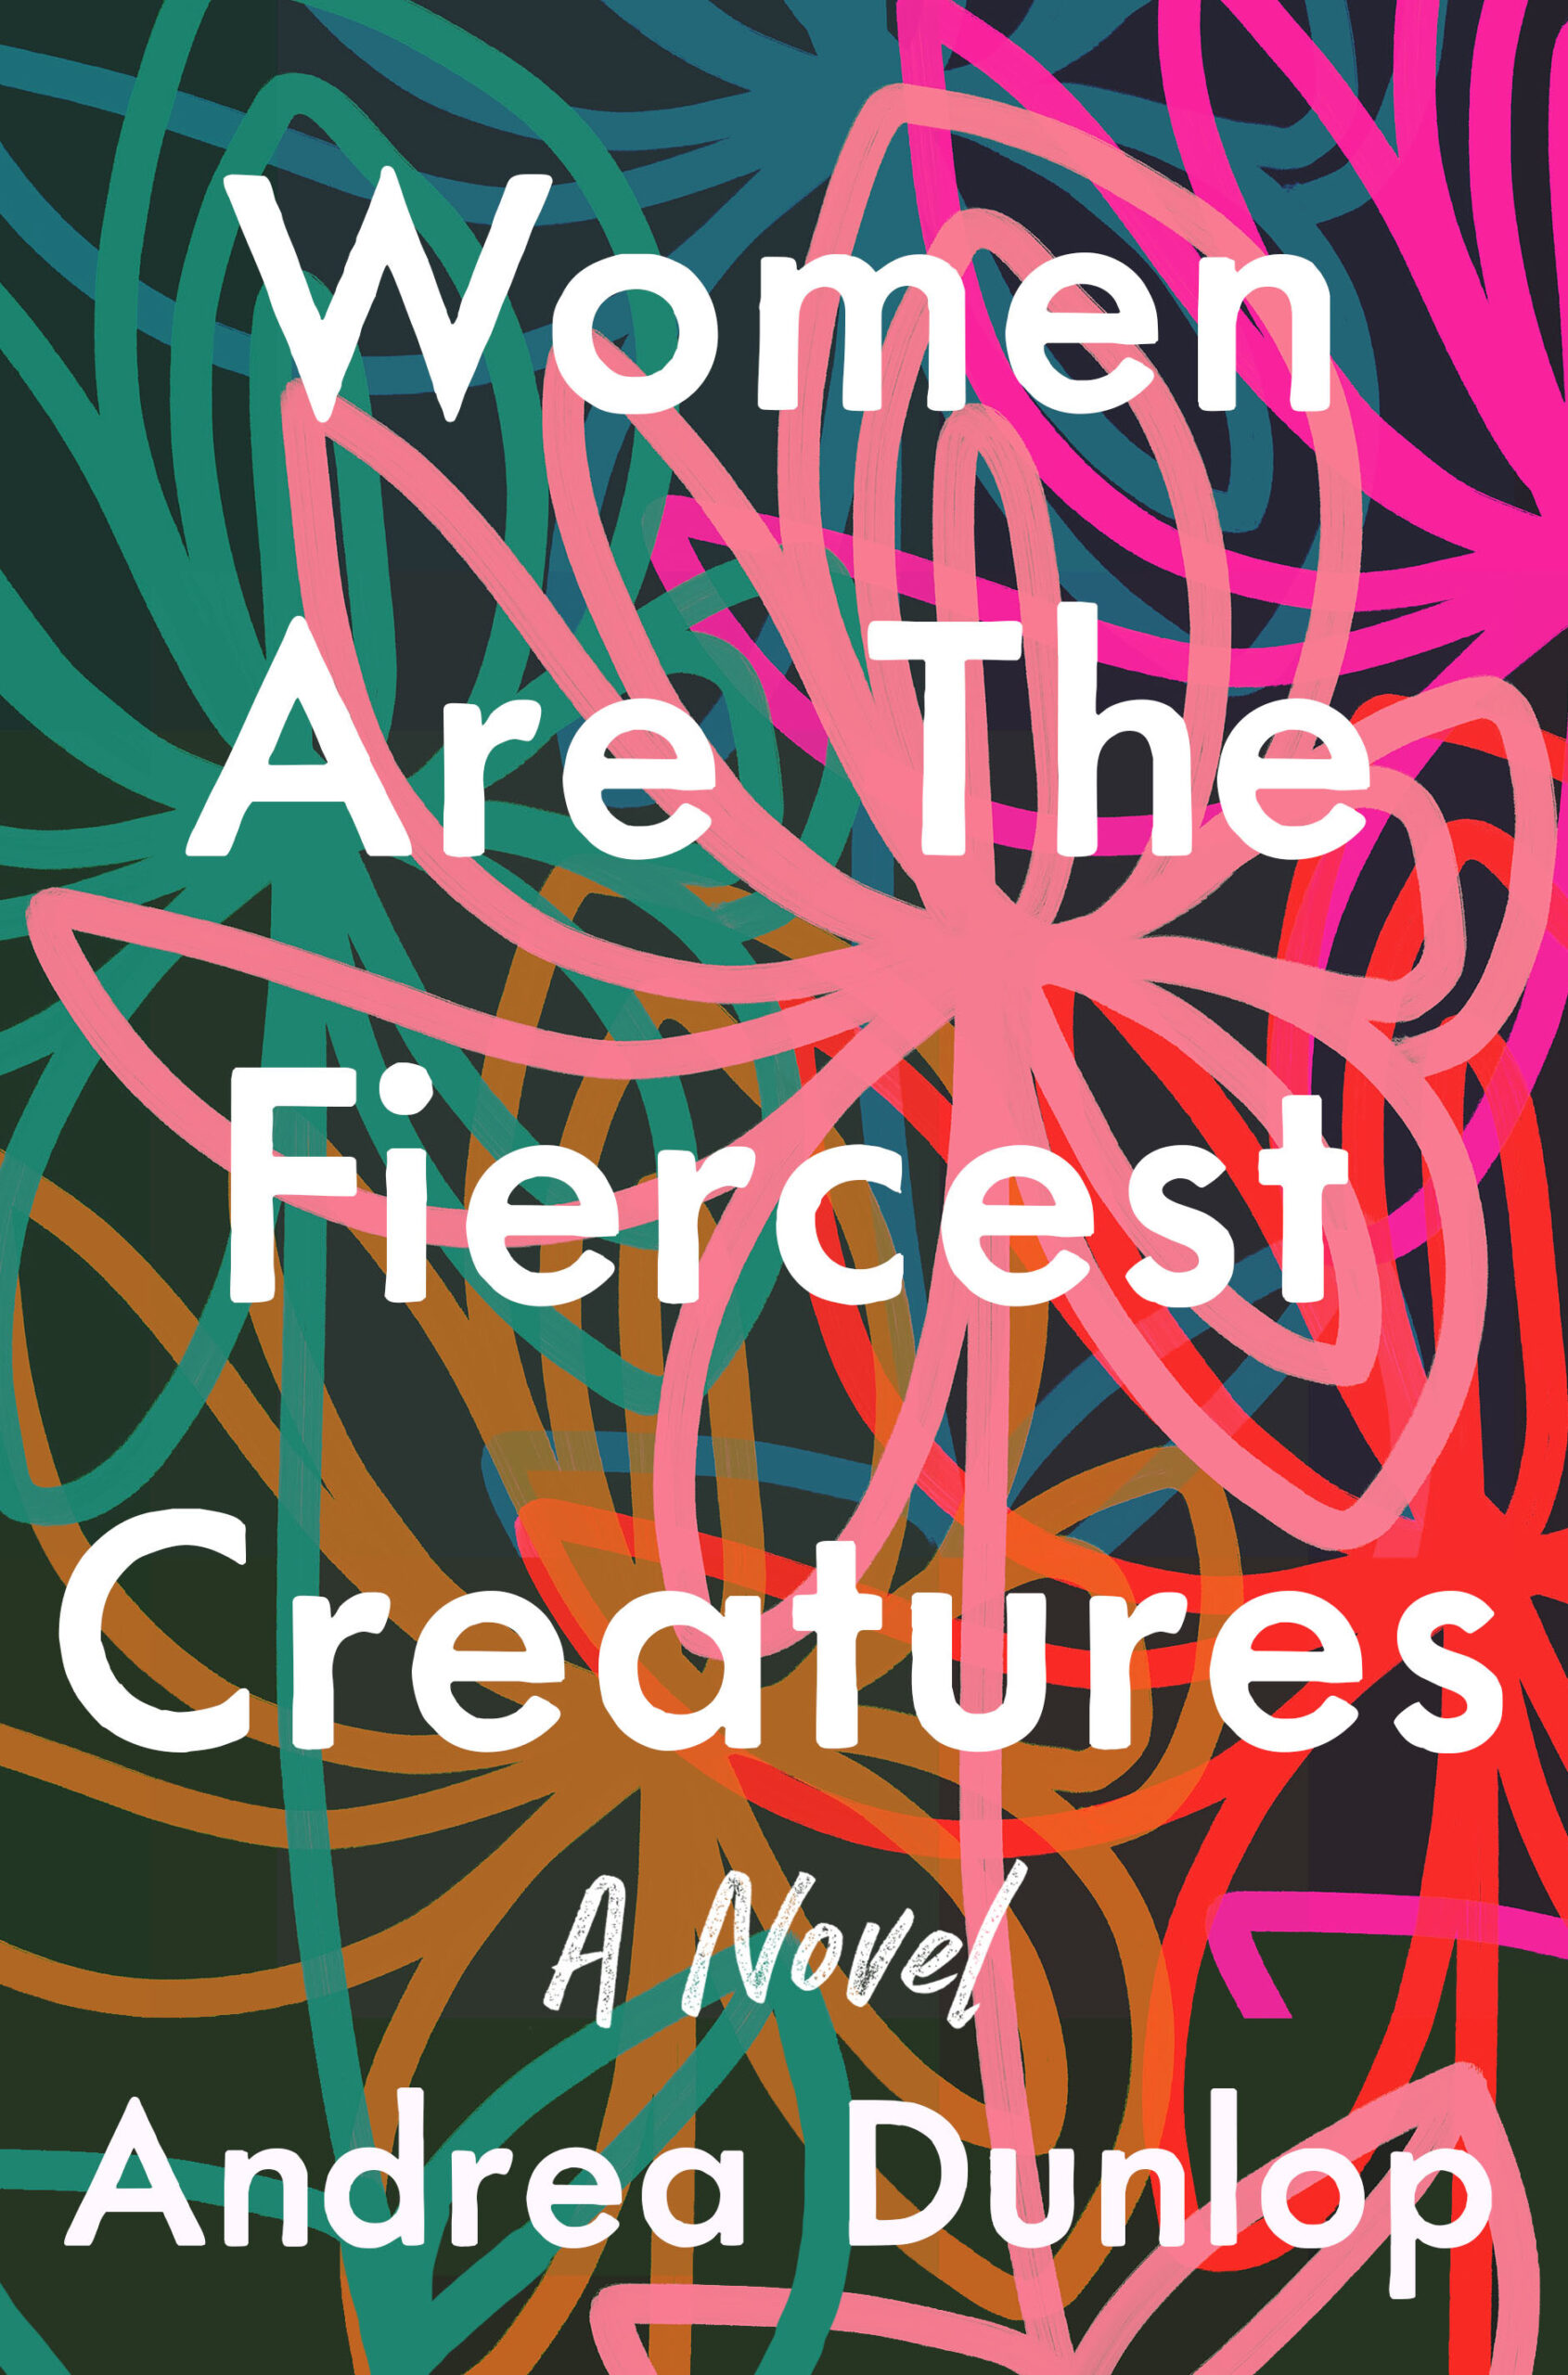 Andrea Dunlop’s book “Women are the Fiercest Creatures,” was published by Zibby Books on March 7.